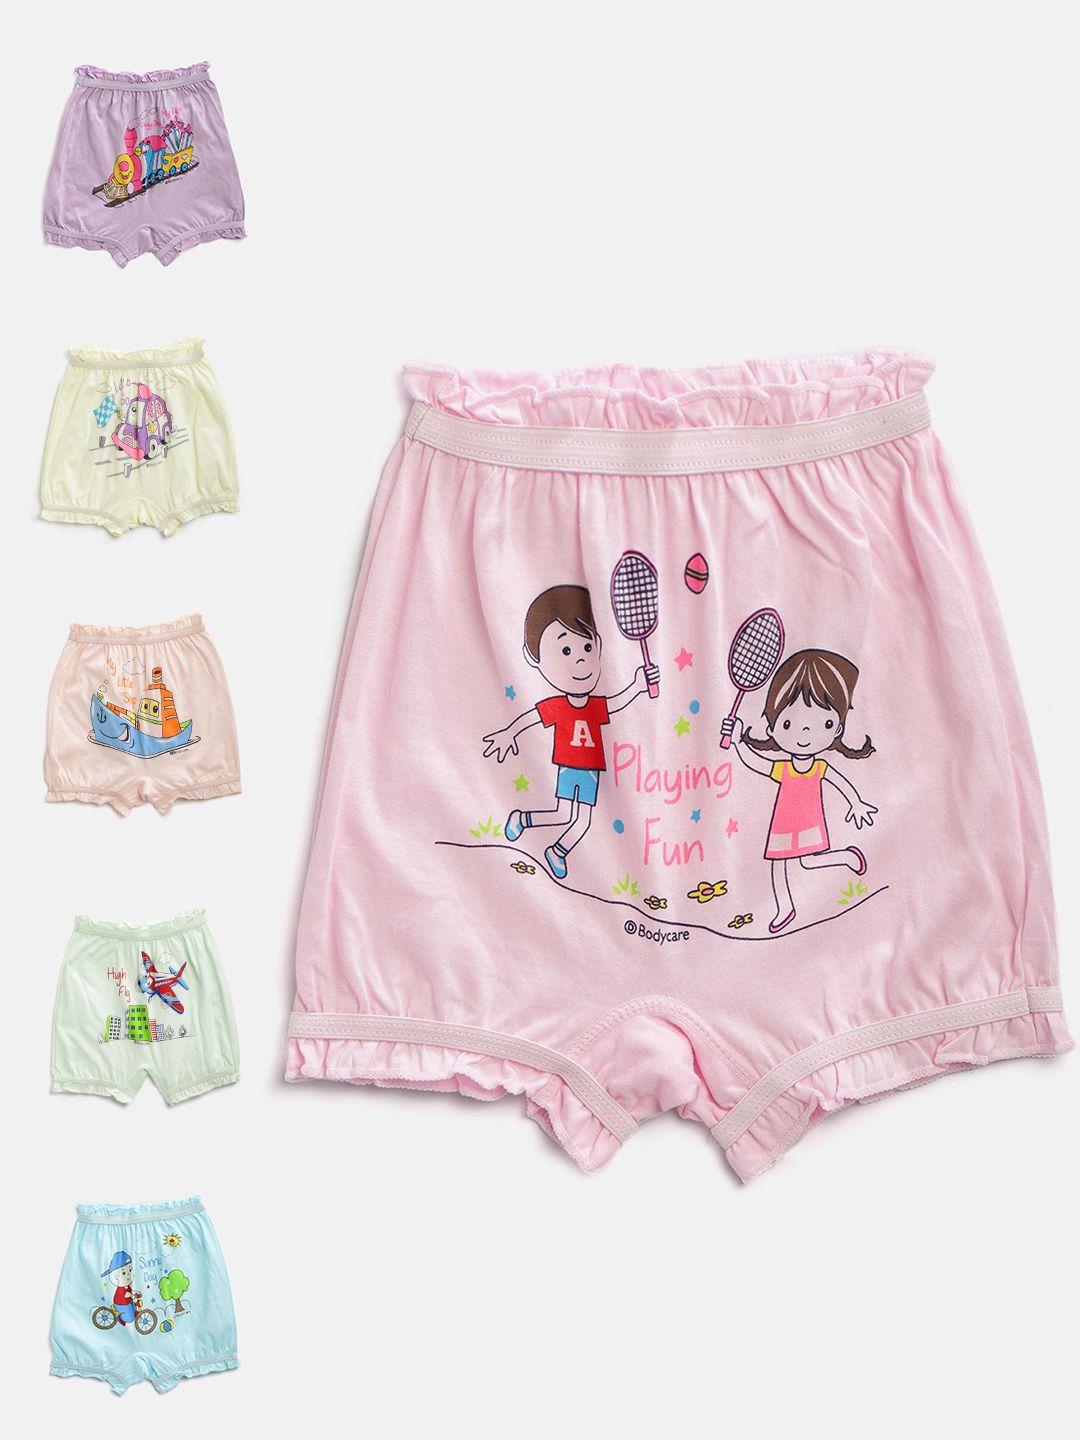 bodycare kids pack of 6 printed bloomer briefs 2200abcdab-45